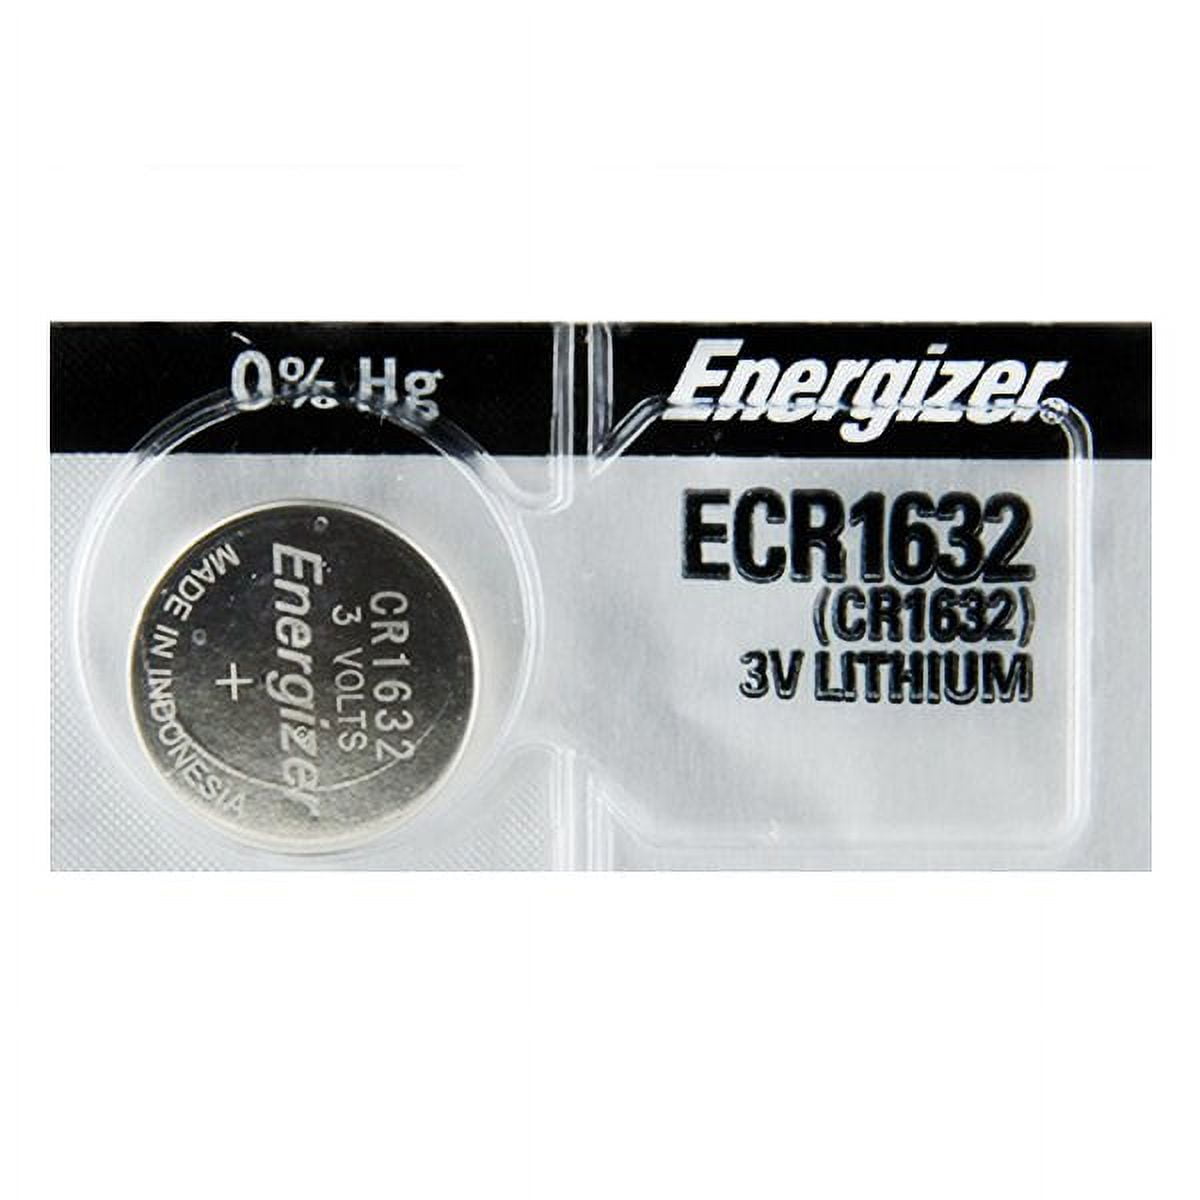  Energizer Battery, 3V Lithium Coin Cell Batteries, Packaging  May Vary, Black, 2 Count : Health & Household